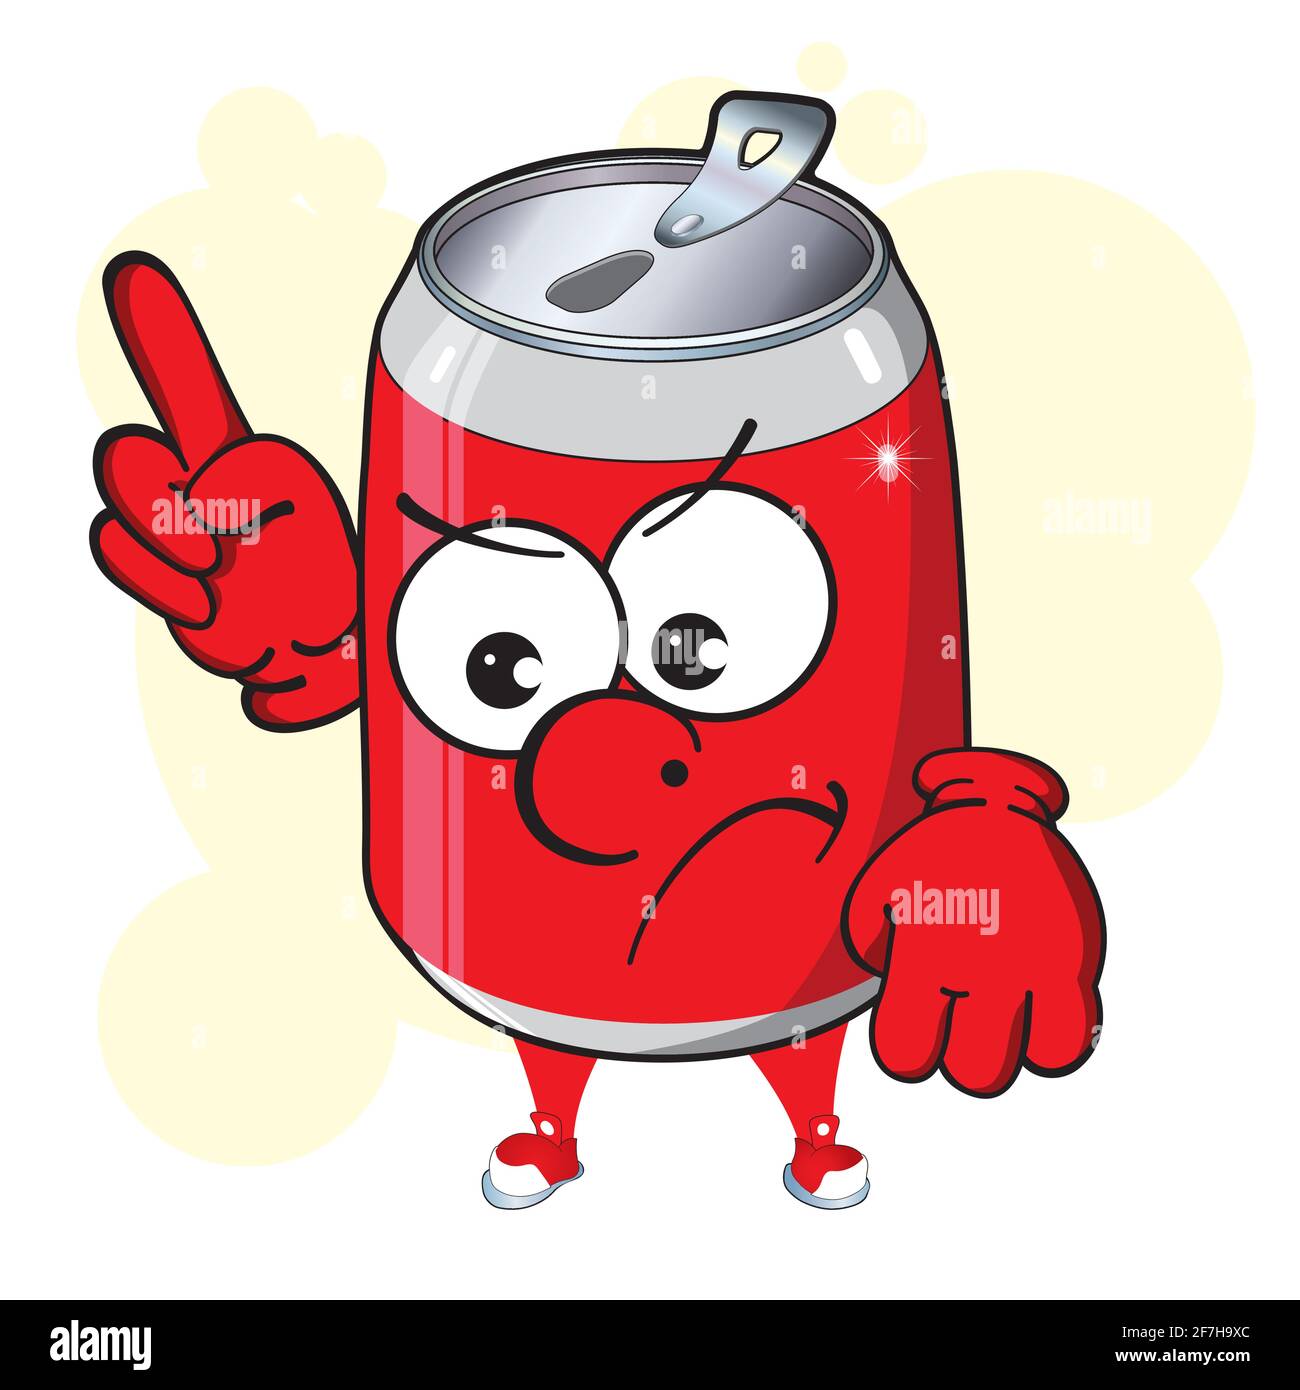 Aluminum can cartoon mascot. Image of funny red can of fizzy drink. Drink, soda, cola, beer. Stock Vector